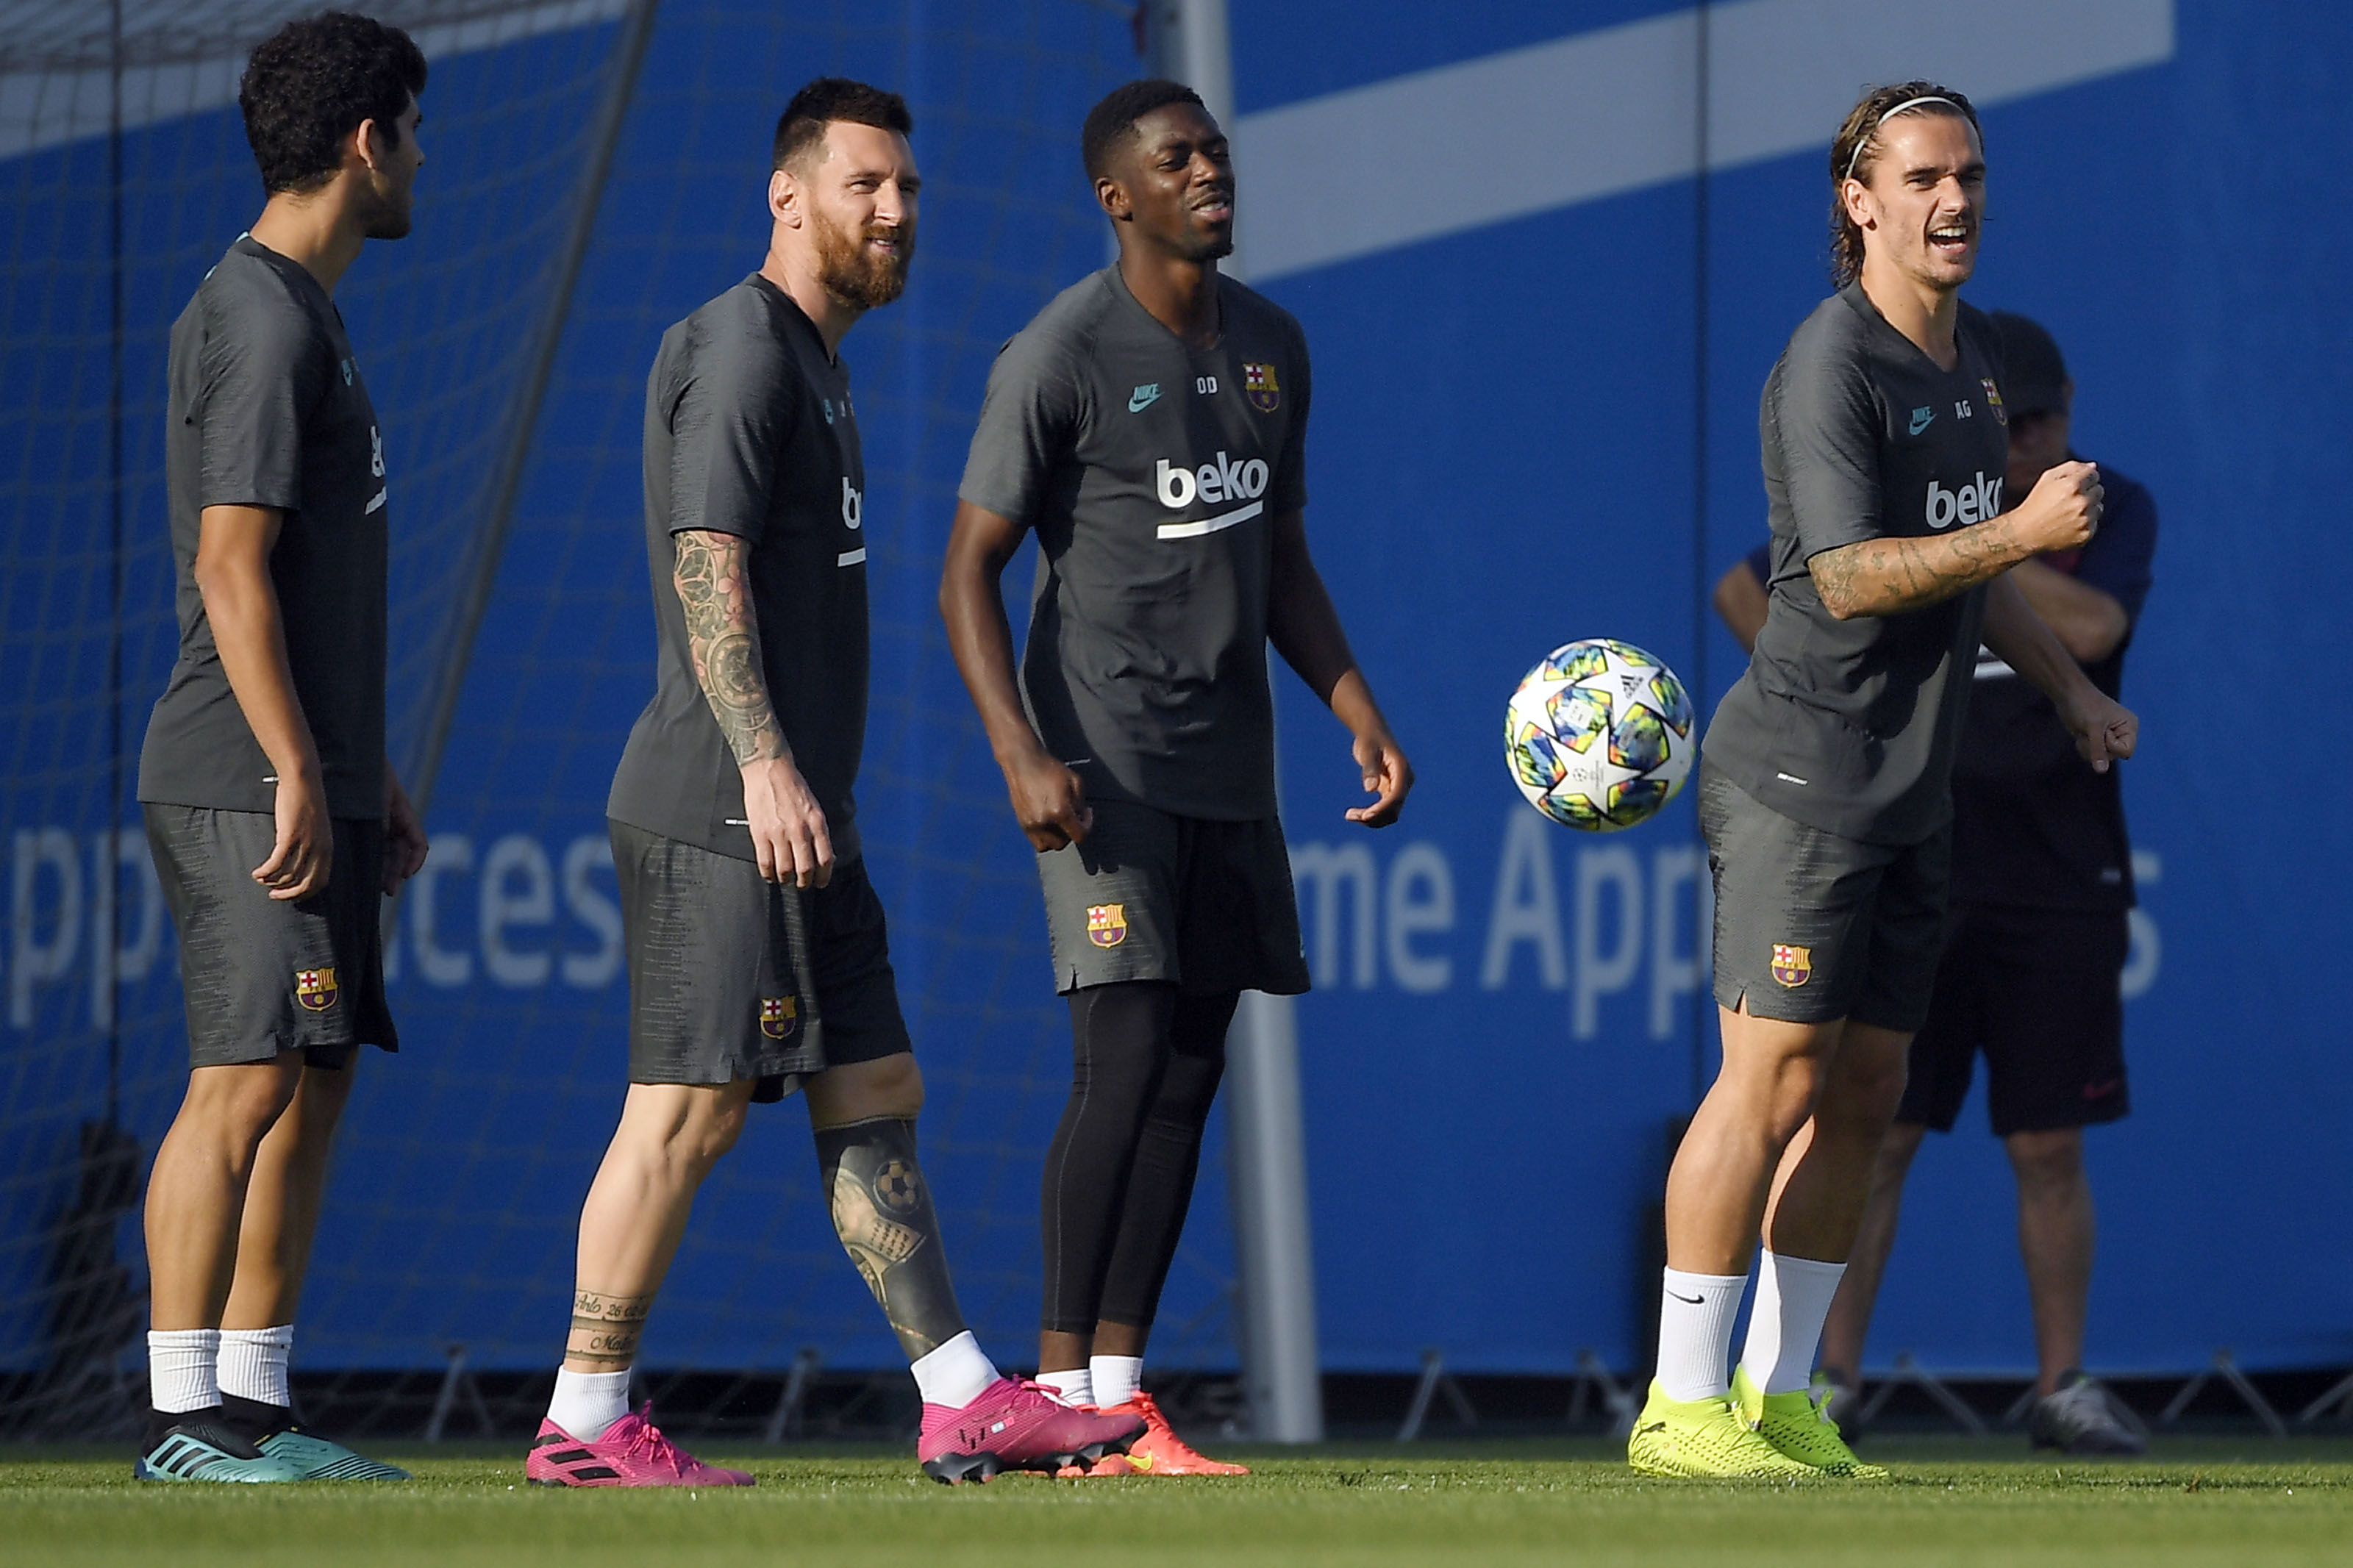 Barcelona's Argentine forward Lionel Messi (2L), Barcelona's French forward Ousmane Dembele (2R) and Barcelona's French forward Antoine Griezmann (R) attend a training session at the Joan Gamper Sports City training ground in Sant Joan Despi, near Barcelona,  on October 1, 2019 on the eve of the UEFA Champions League Group F football match against Inter Milan. (Photo by LLUIS GENE / AFP)        (Photo credit should read LLUIS GENE/AFP via Getty Images)